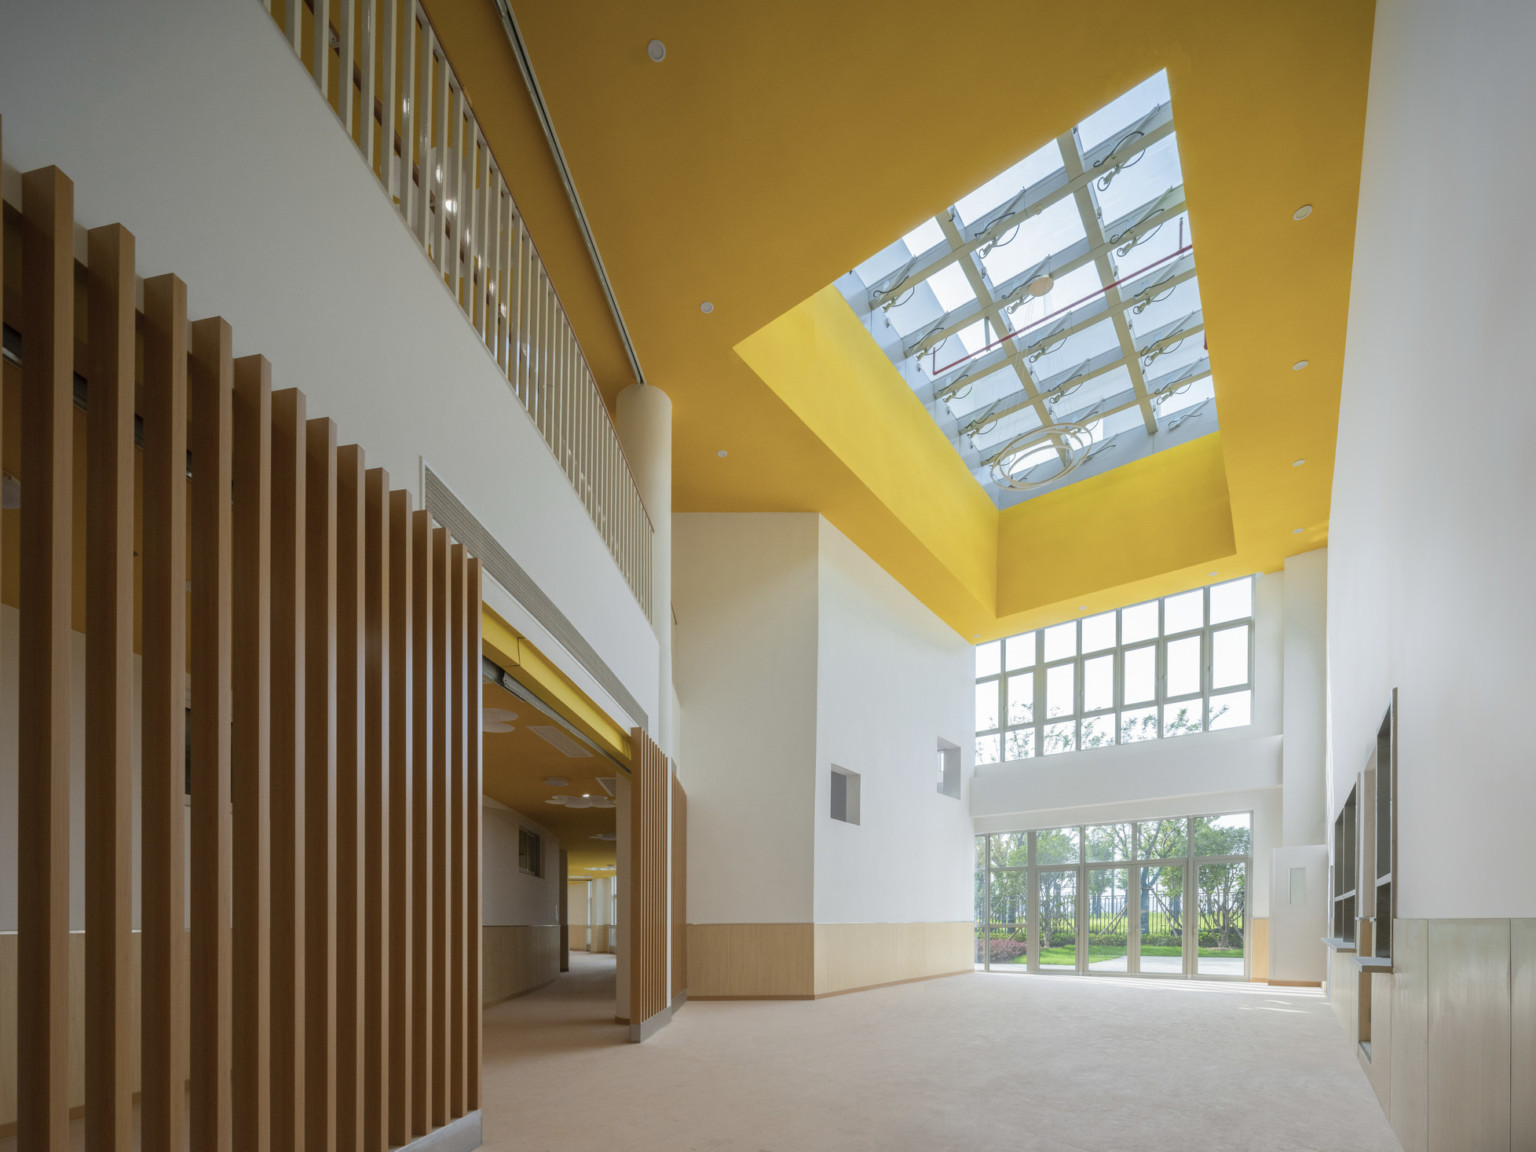 Double height interior hallway with wood slat accents to left and yellow ceiling around skylight, window wall at end of hall